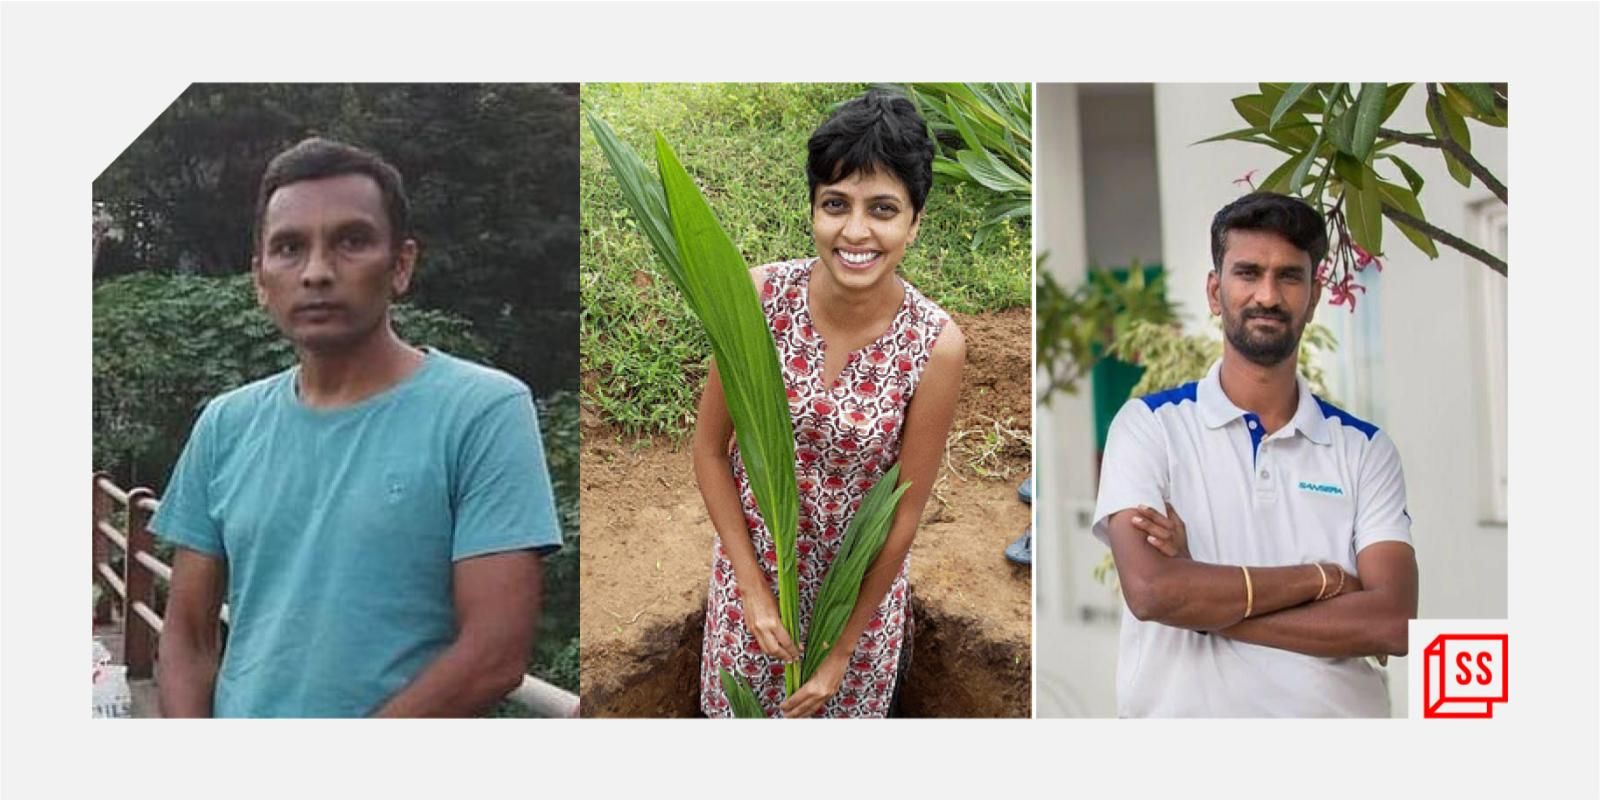 Meet the unsung heroes conserving India’s natural resources